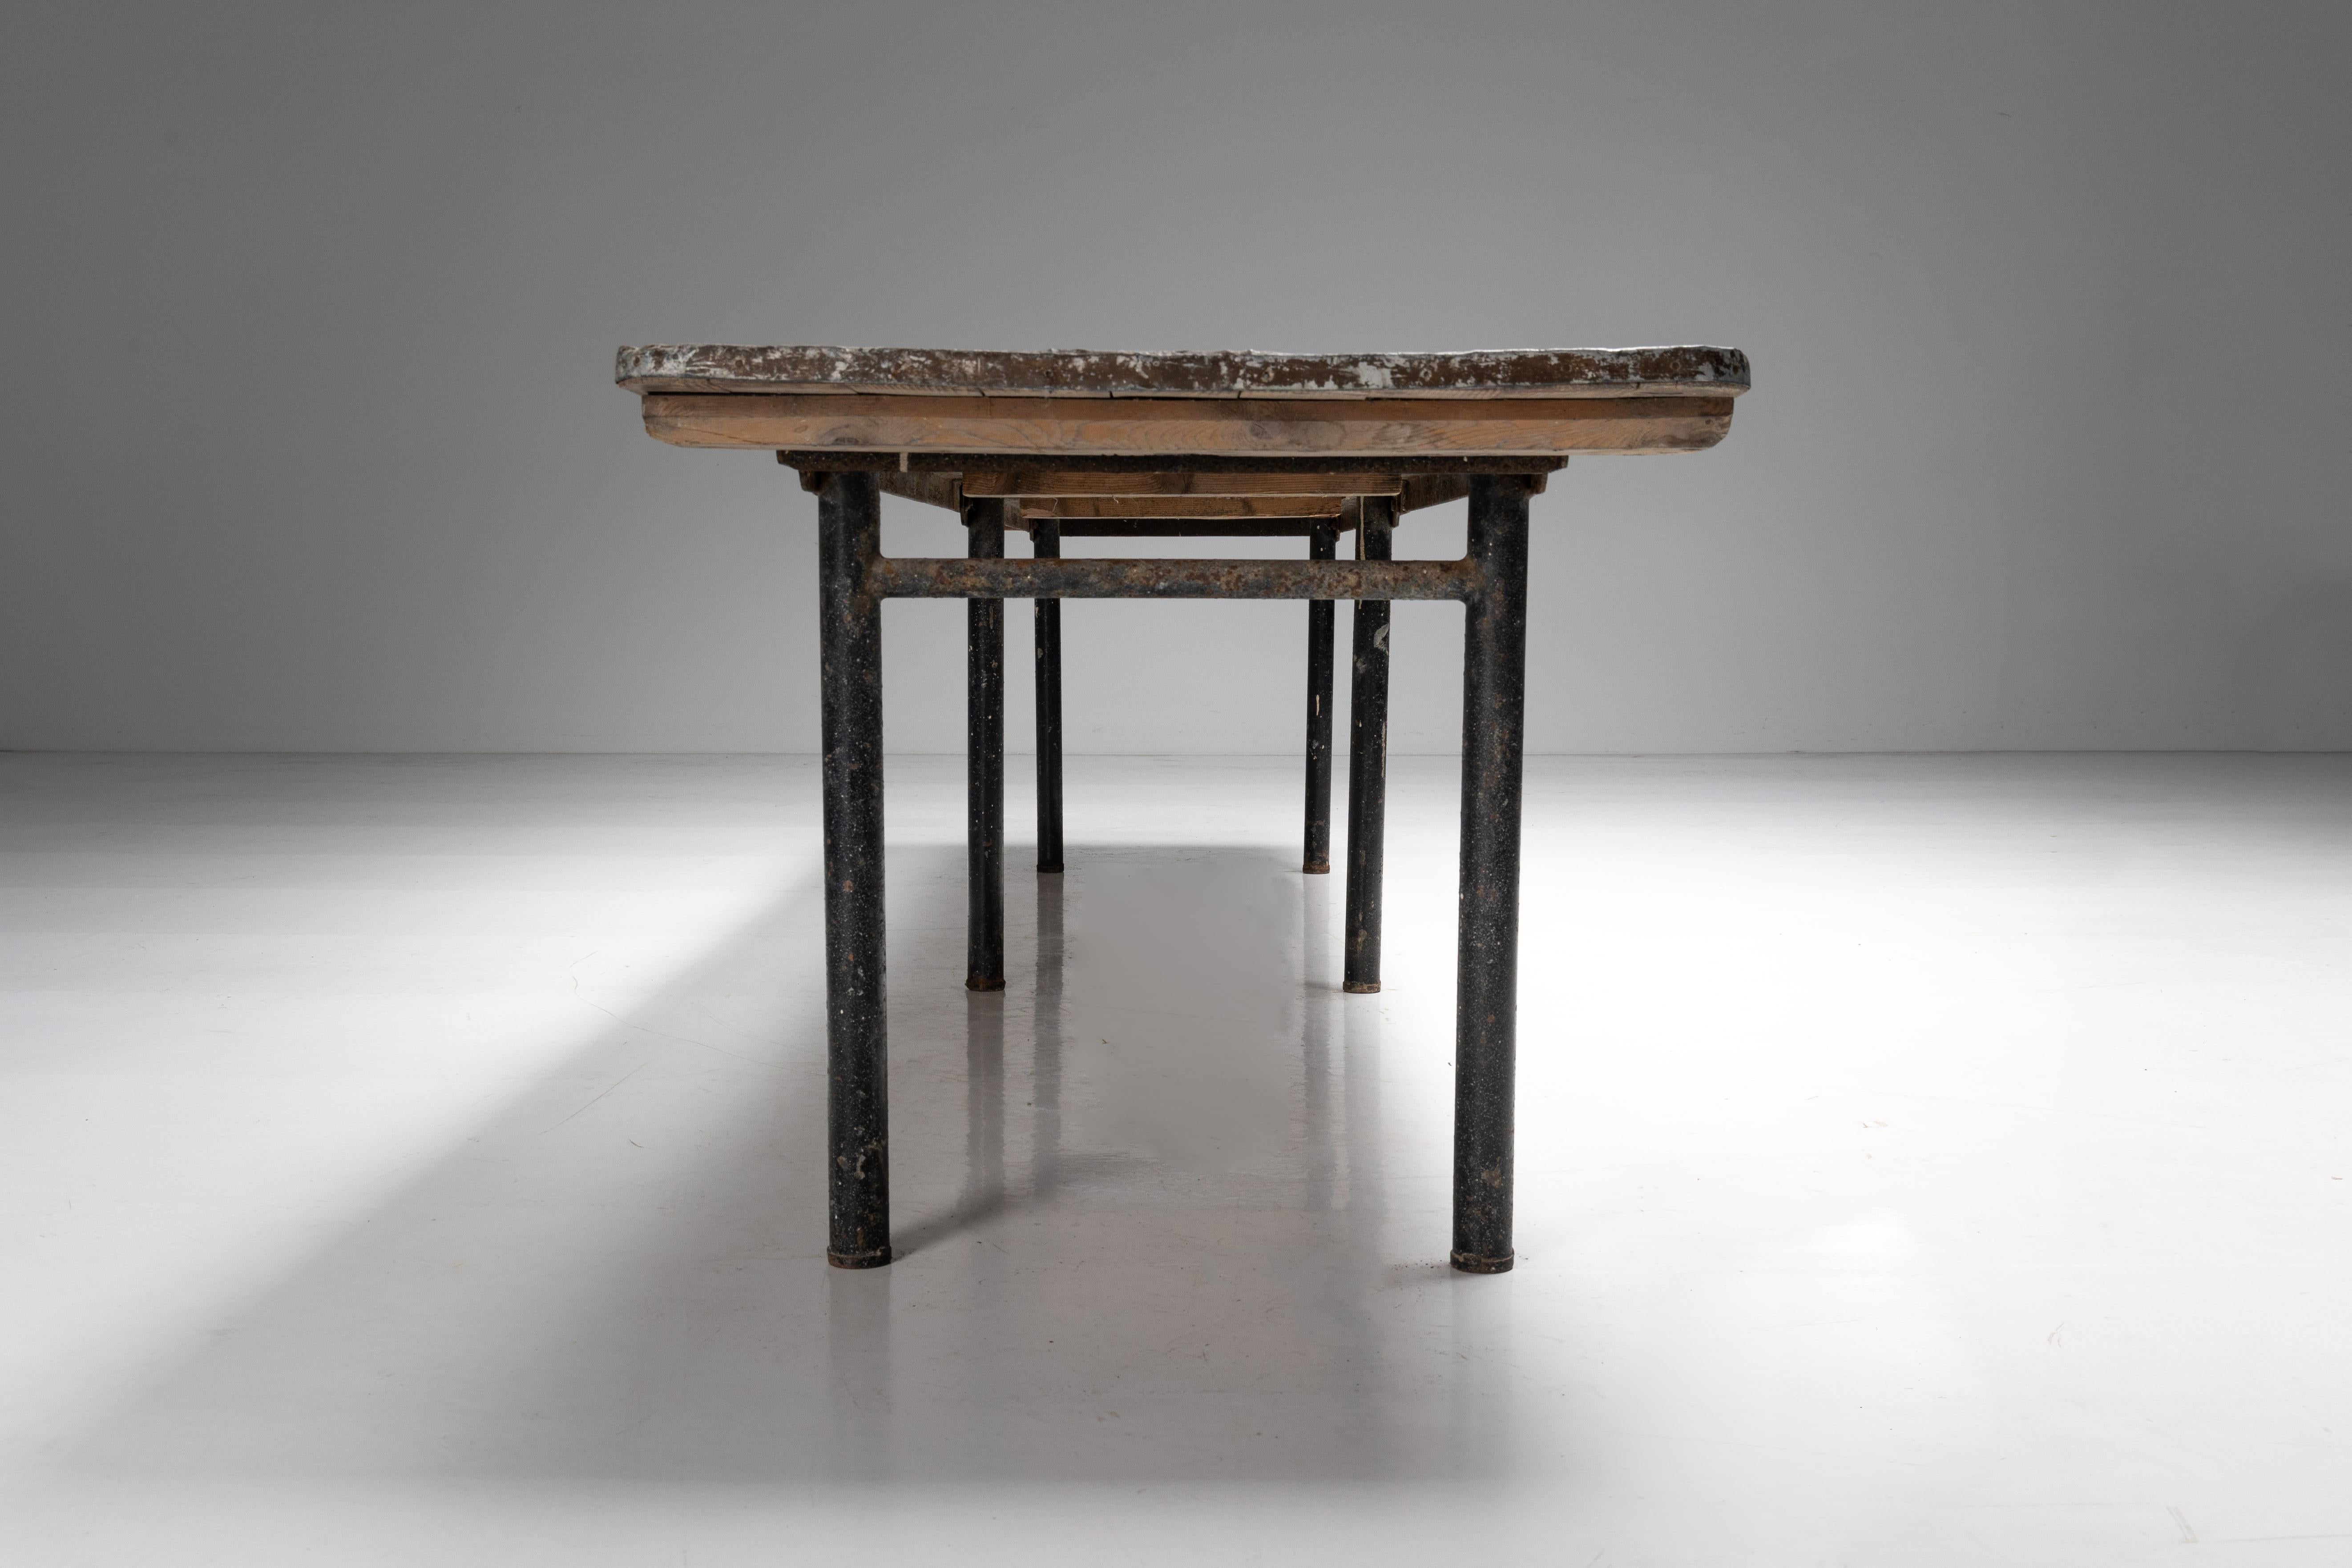 Industrial Design; 1950s; Butchers Tables; Butchery; Metal; Iron; Wood; France;

Industrial dining table, a timeless piece hailing from the bustling 1950s era. Crafted with precision and character, this extraordinary table boasts a generous wooden